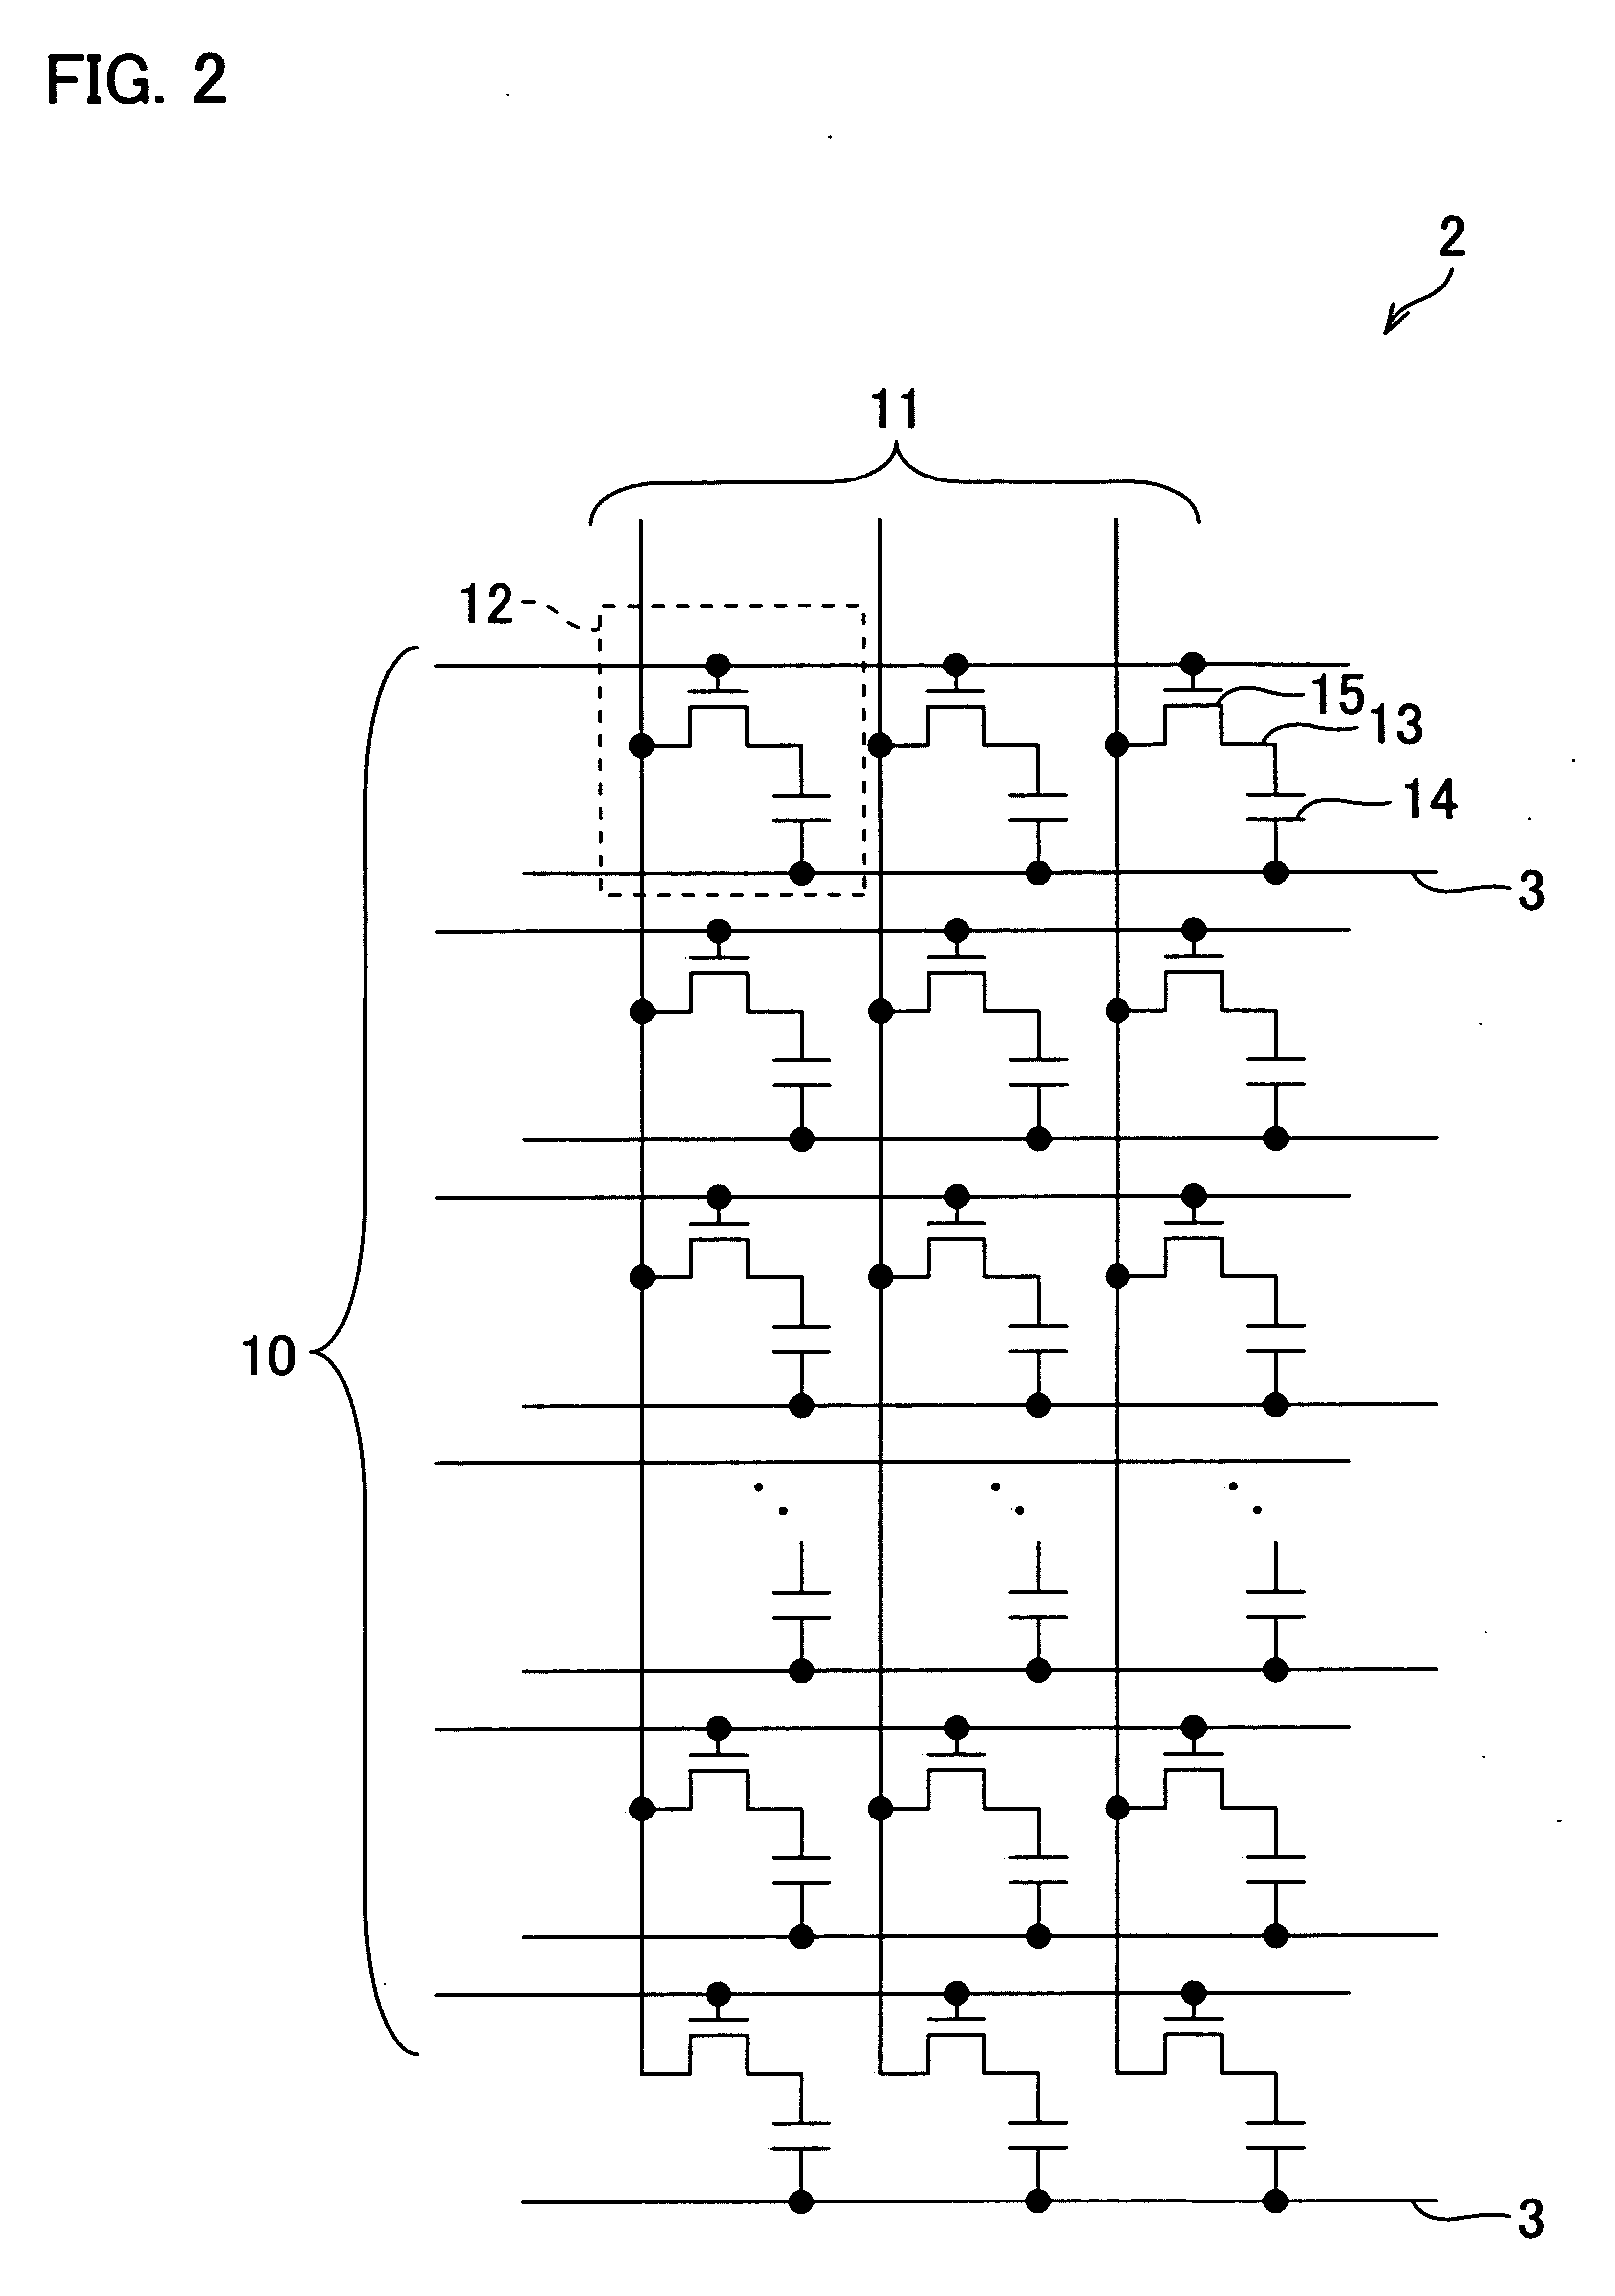 Display driving integrated circuit and method for determining wire configuration of the same